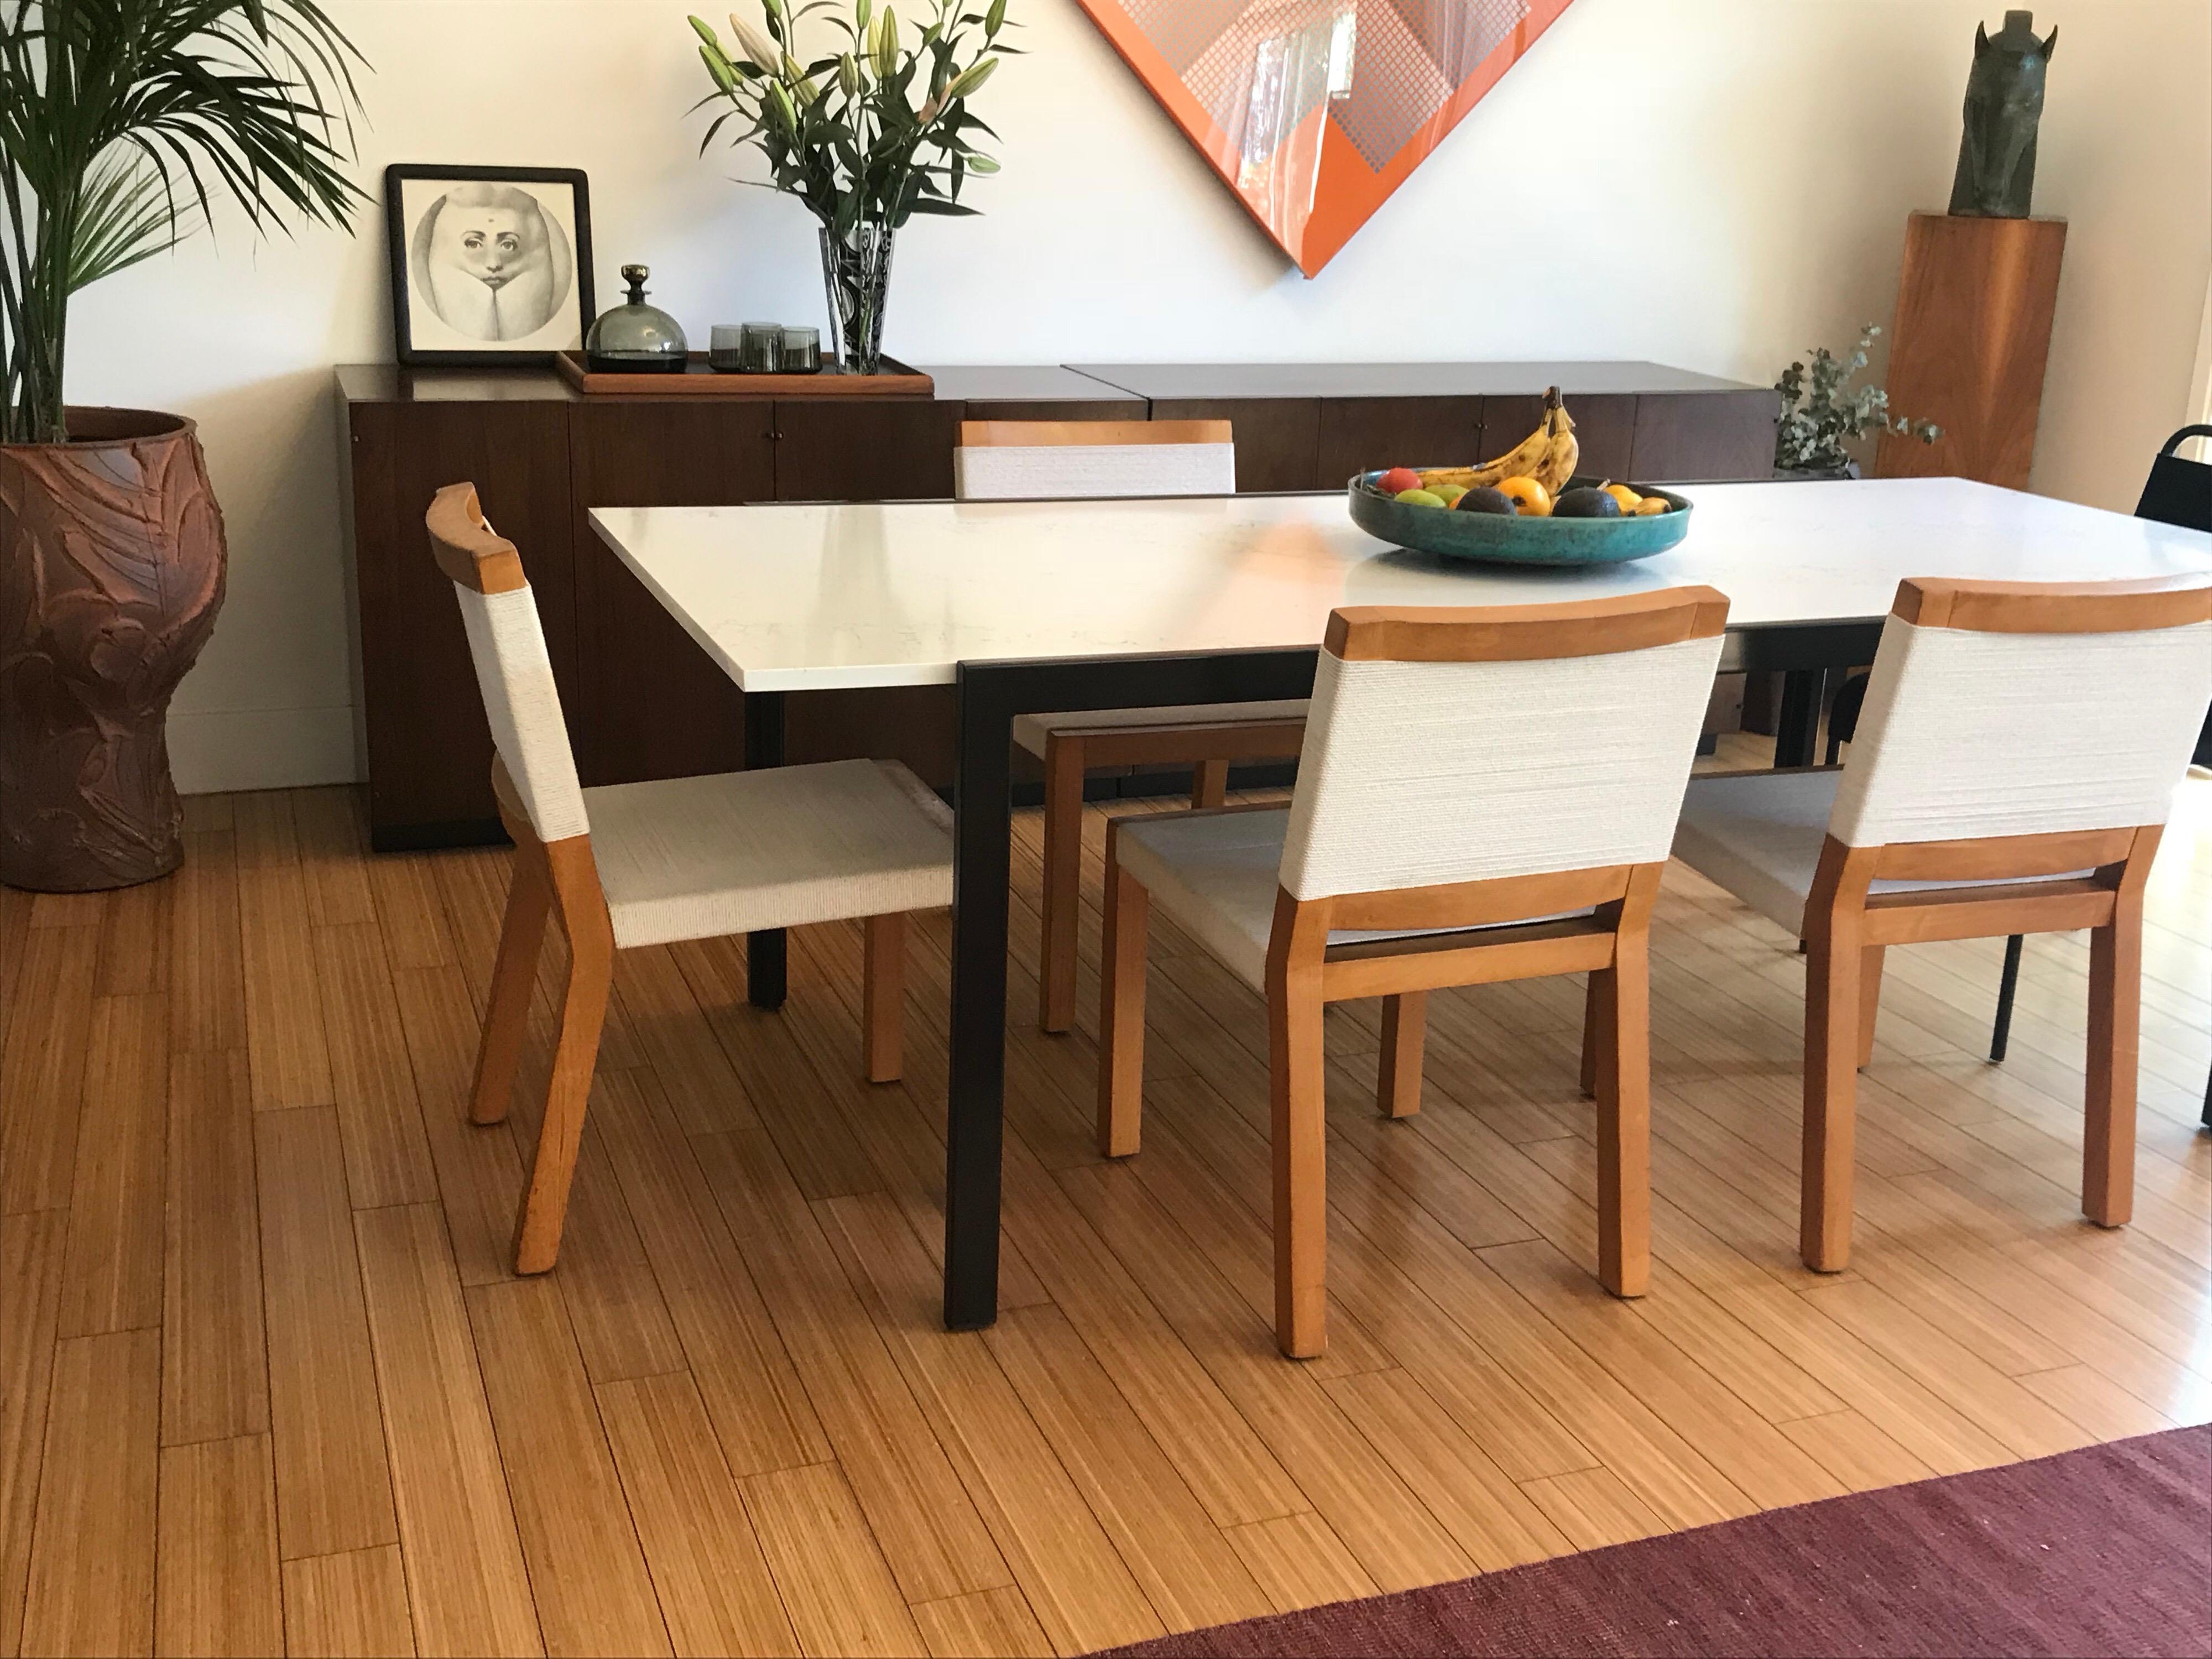 Van Keppel Green Wood and Cord Chairs, Beverly Hills 2